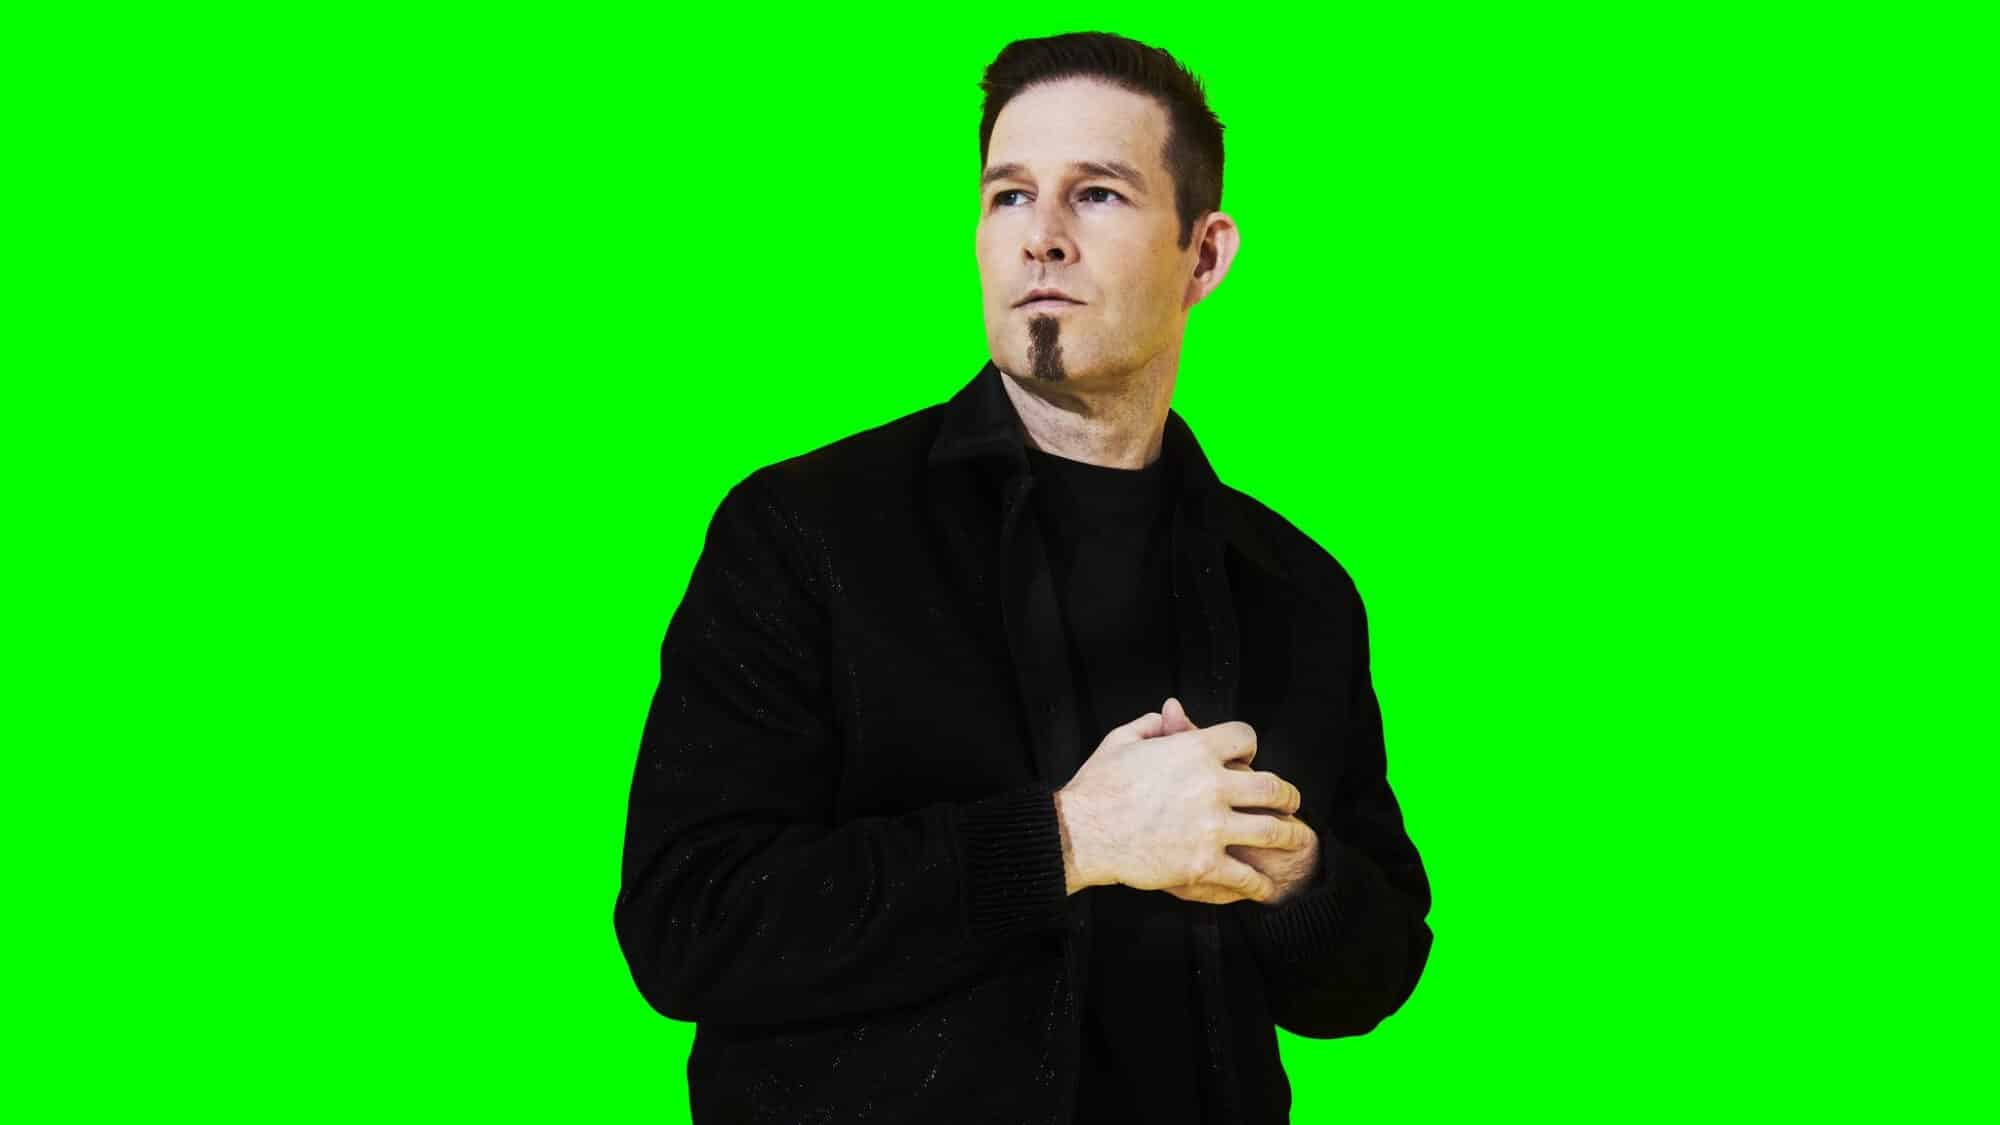 Darude Darude Brings Us 'Together' With His Latest Lp [Review]